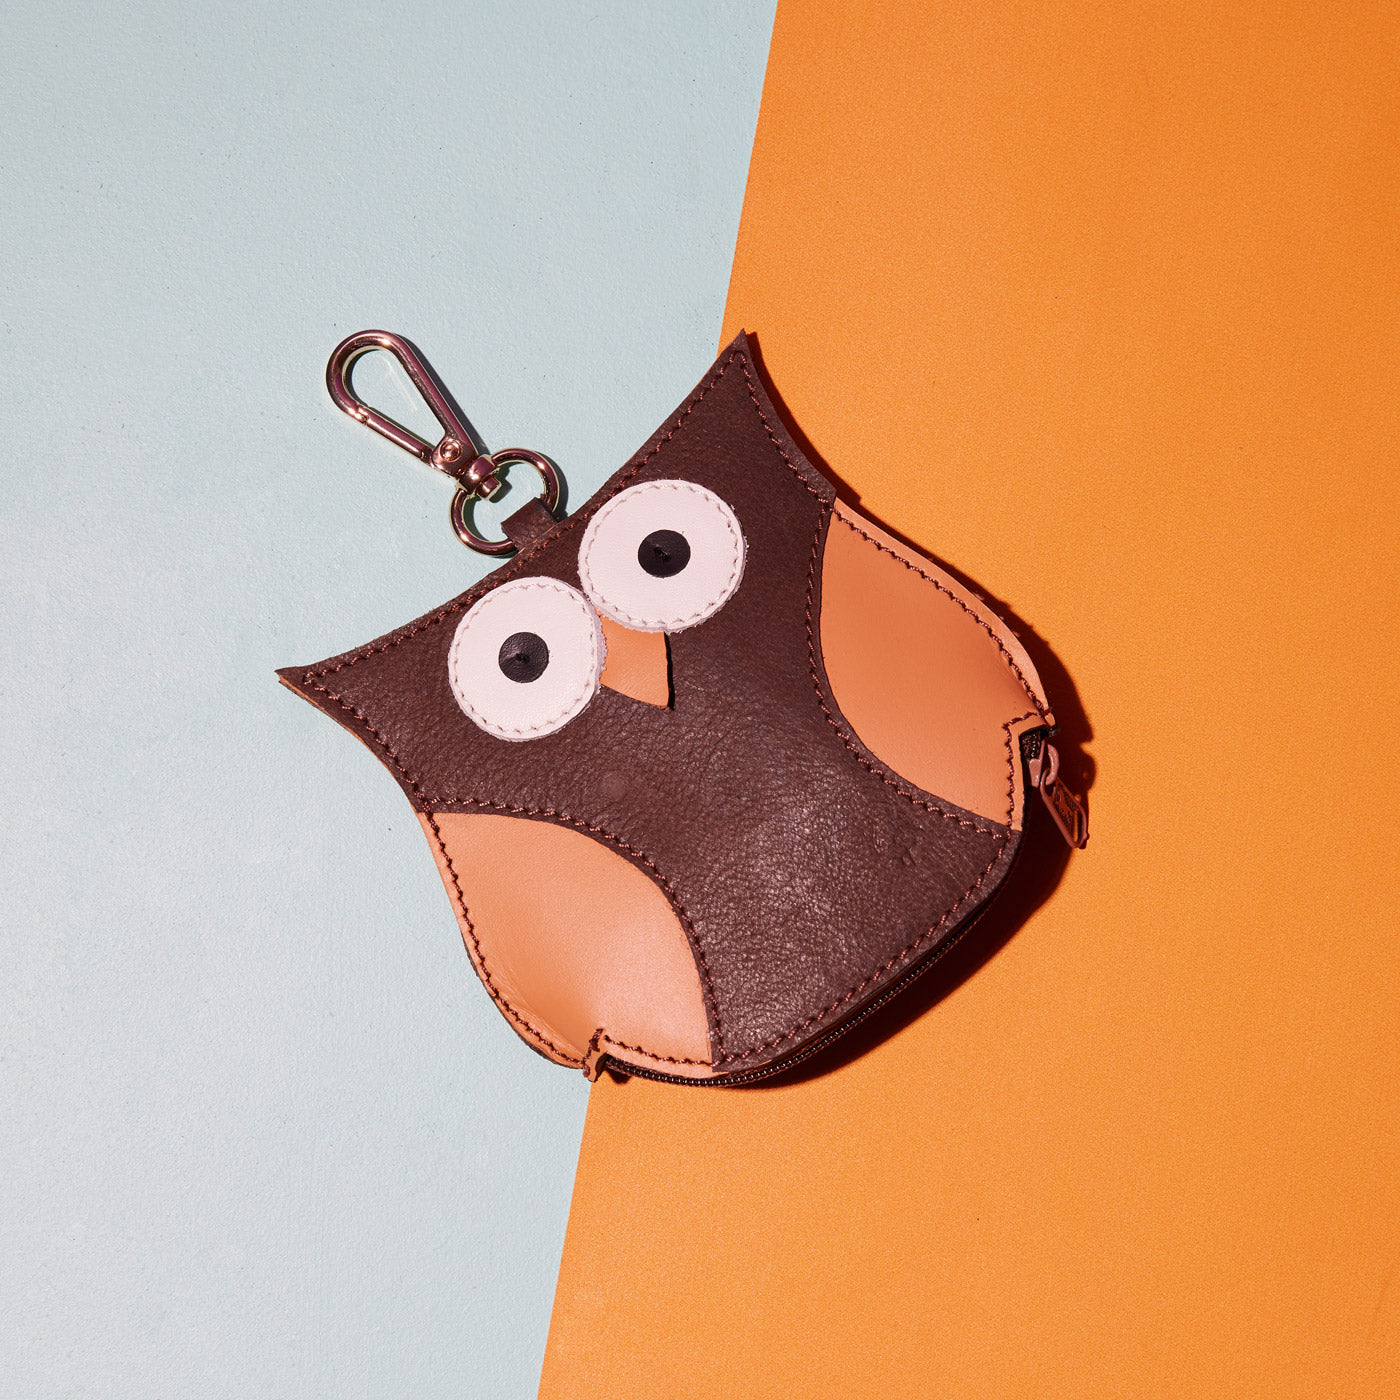 Wicker Darling's Arianrhod the owl coin purse on a colourful background